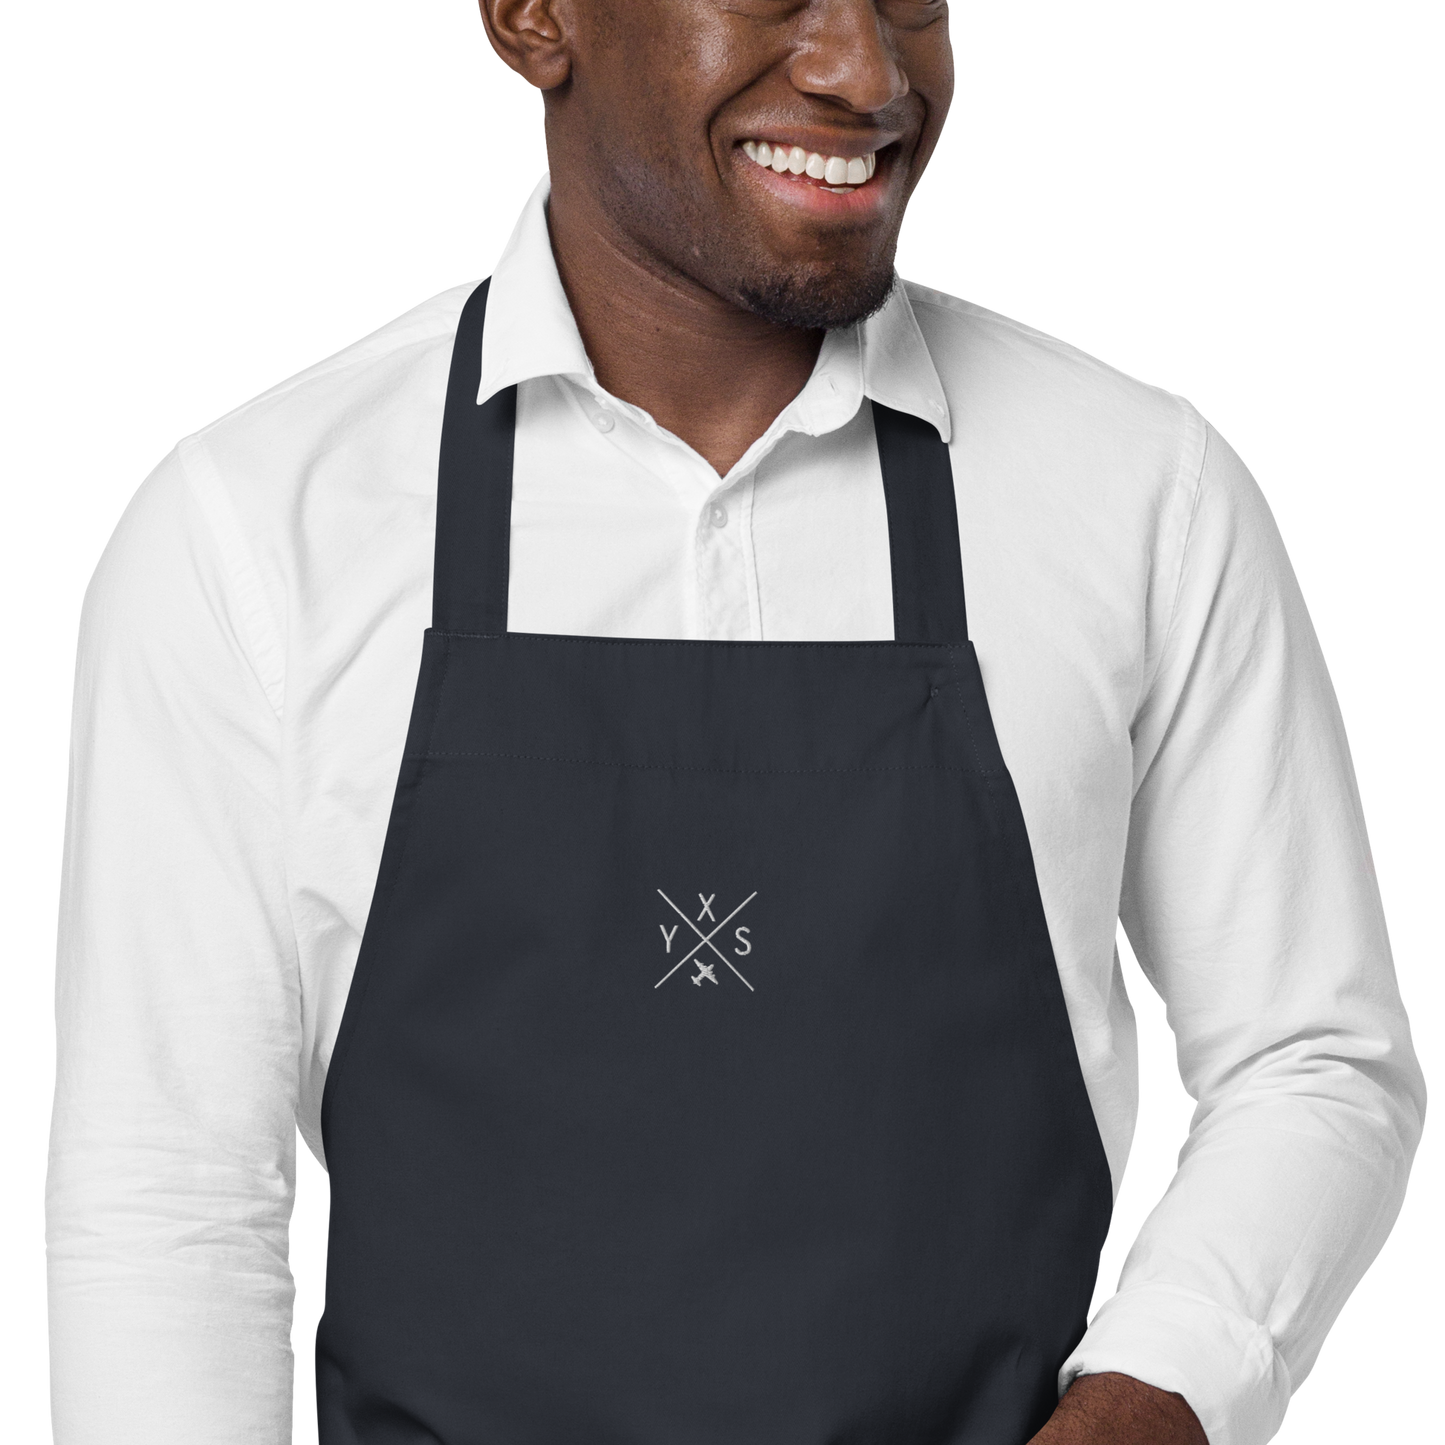 YHM Designs - YXS Prince George Organic Cotton Apron - Crossed-X Design with Airport Code and Vintage Propliner - White Embroidery - Image 10